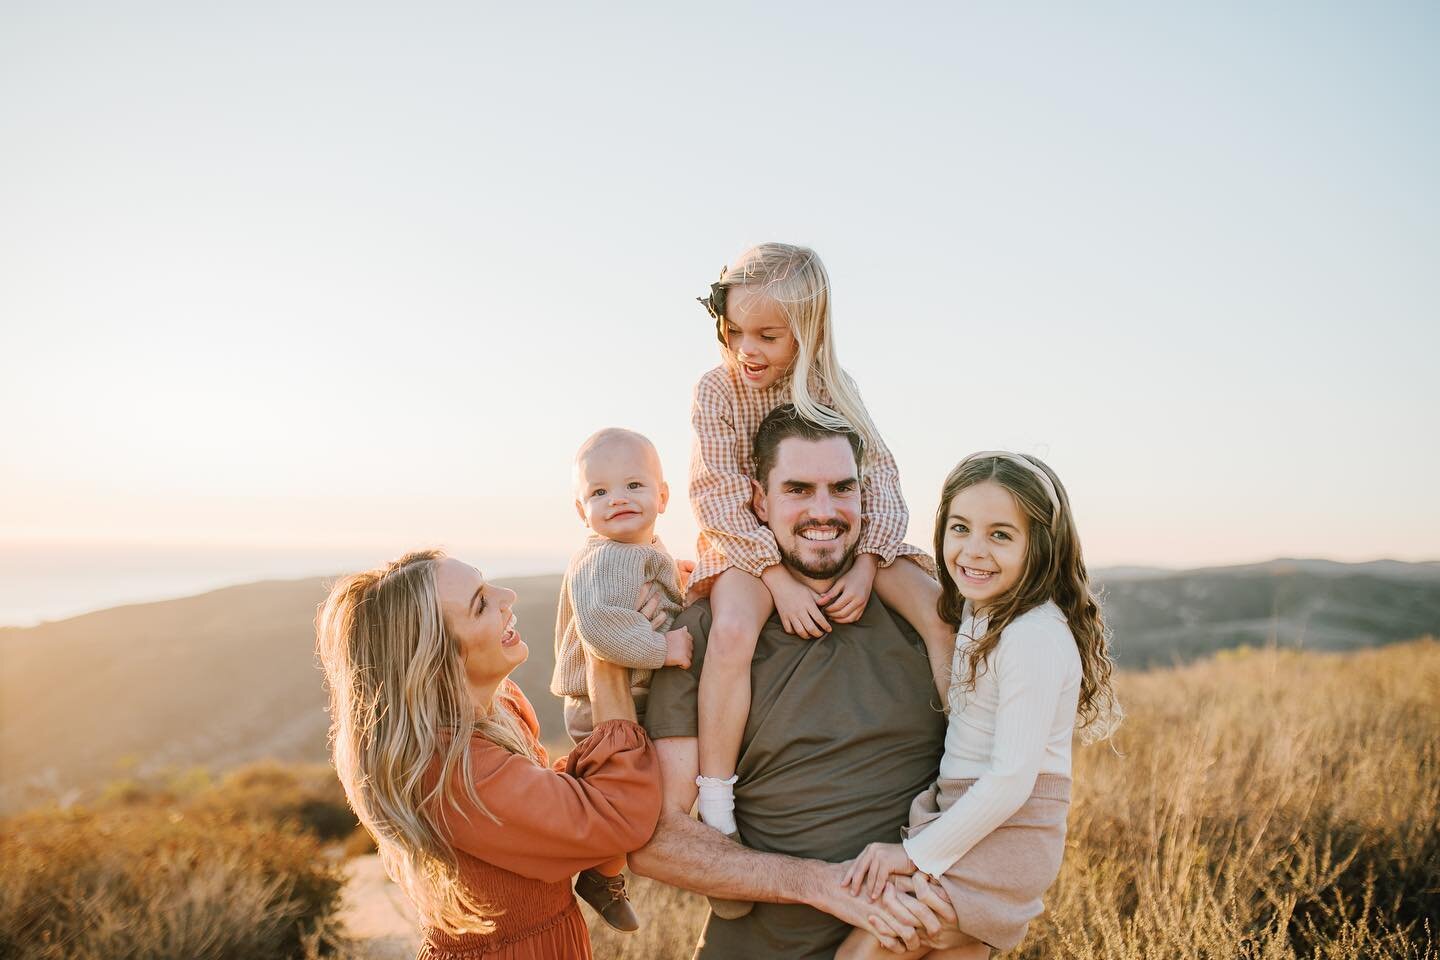 More family sessions here please🥹

Offering $200 off the next 3 families who book online with code HOLIDAY ($100 off after that)🎉 Eligible for dates from now through April. Save your spot now and we can figure out the details later.